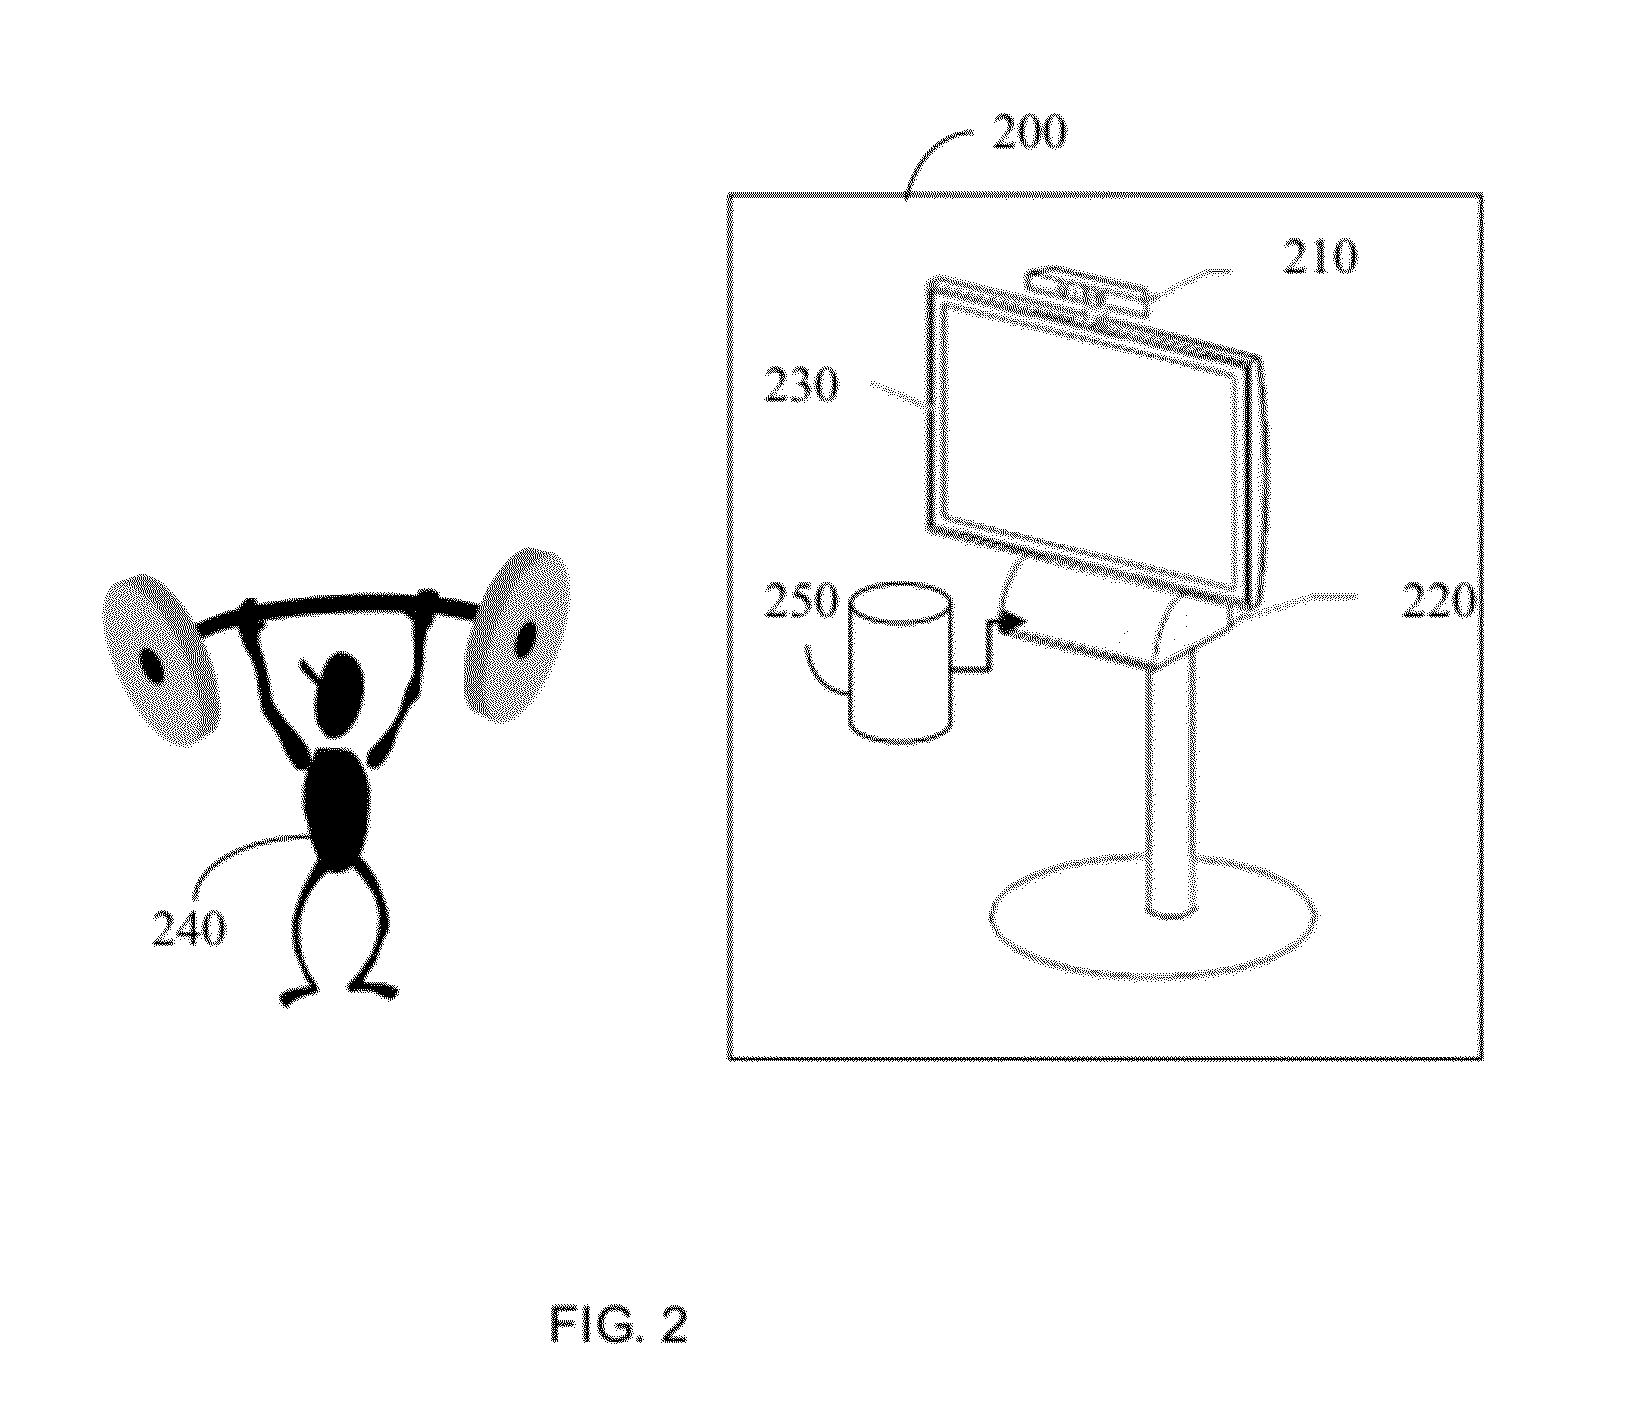 Method and system for monitoring and feed-backing on execution of physical exercise routines